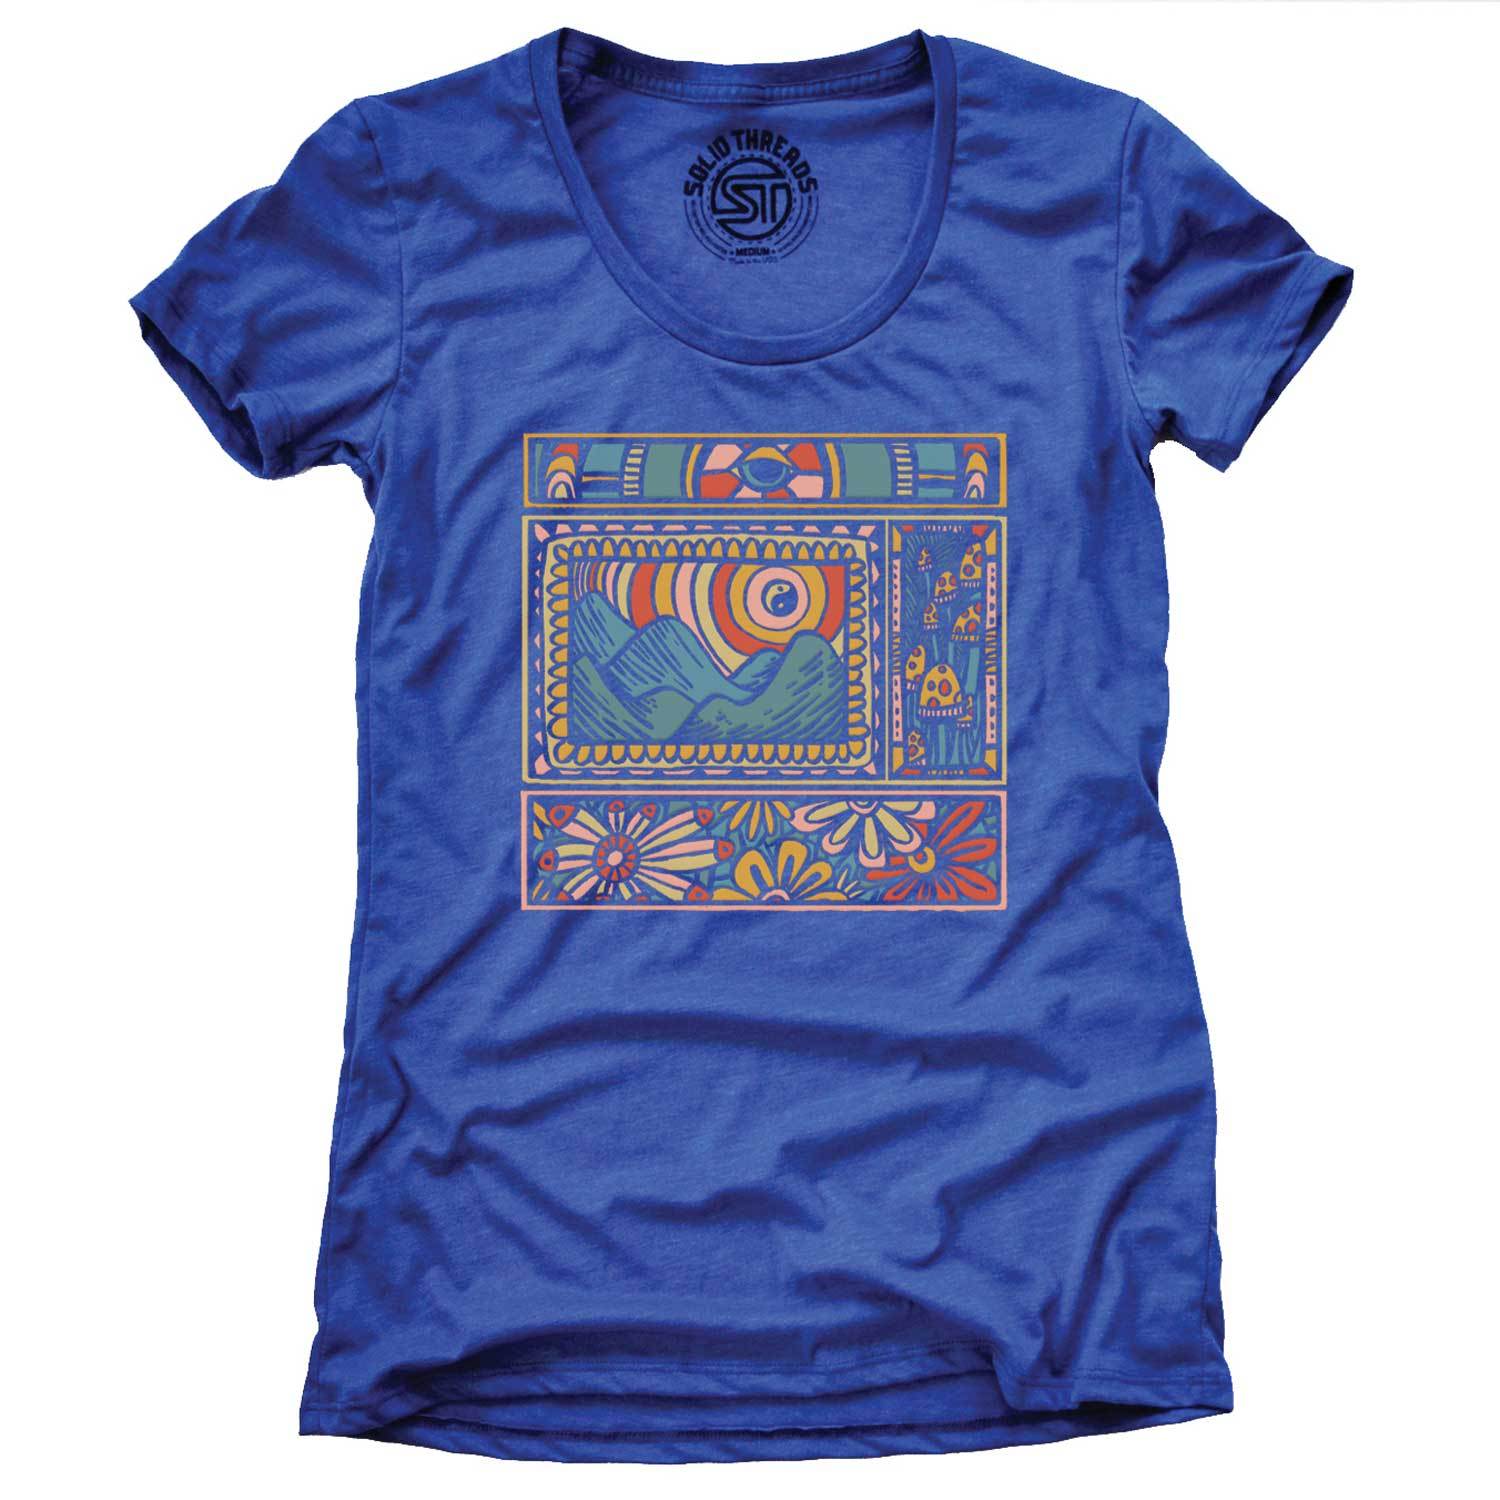 Vintage Women's Trippy Nature Psychedelic Graphic Tee | Cool Artsy Mushrooms T-Shirt | Solid Threads